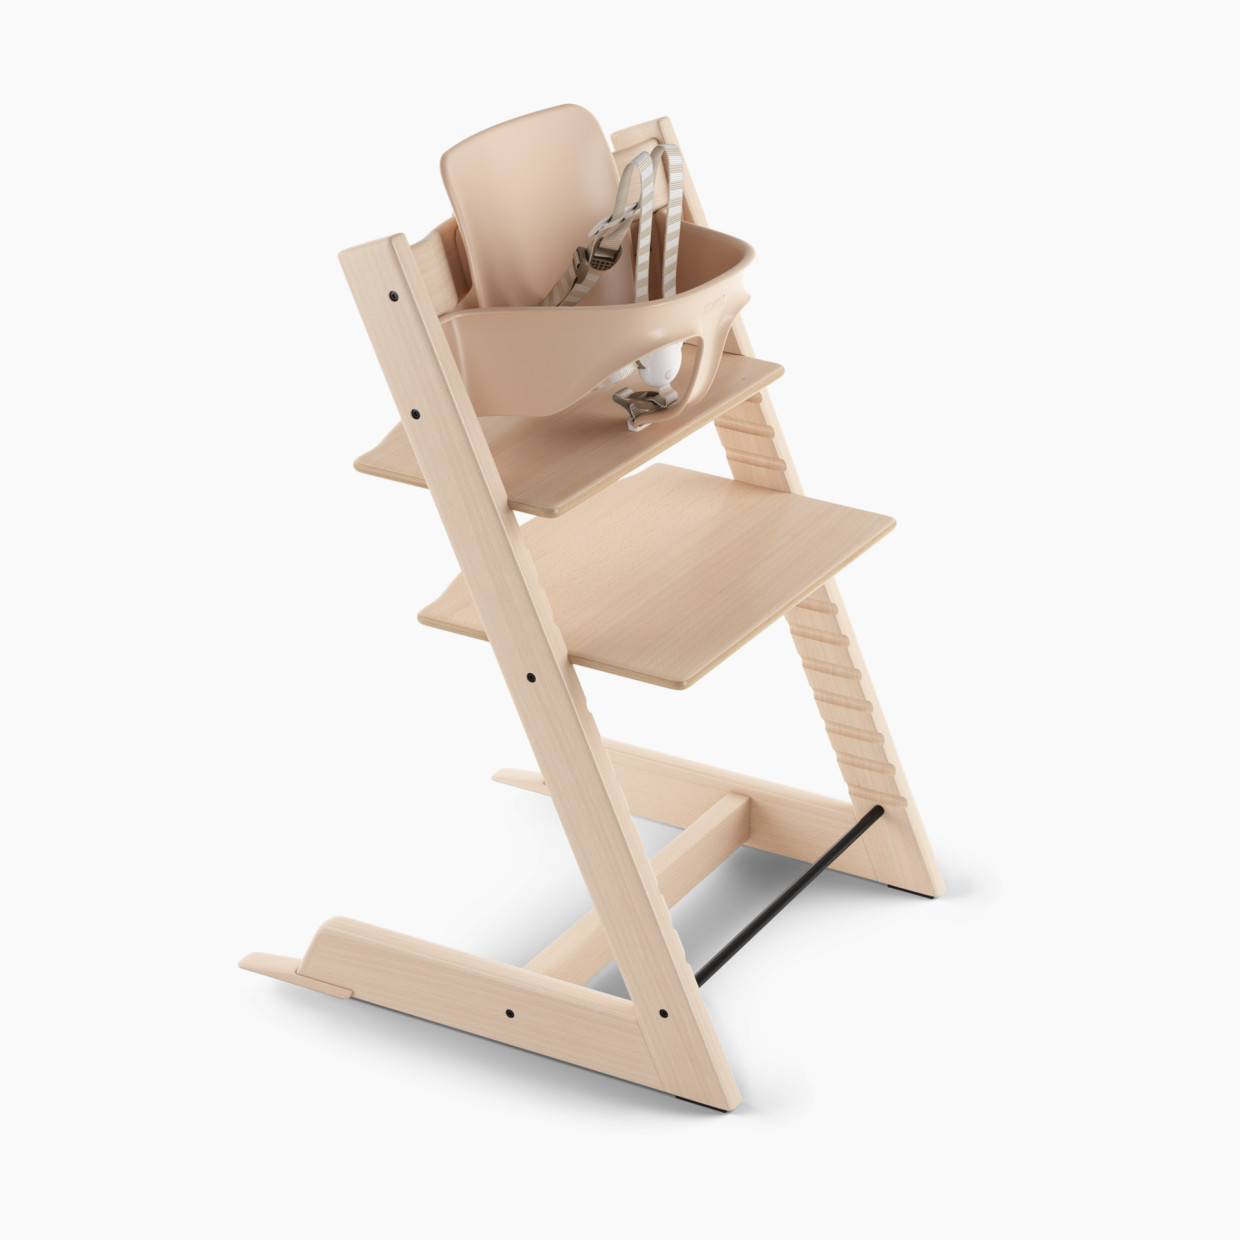 Stokke Tripp Trapp High Chair - Natural.